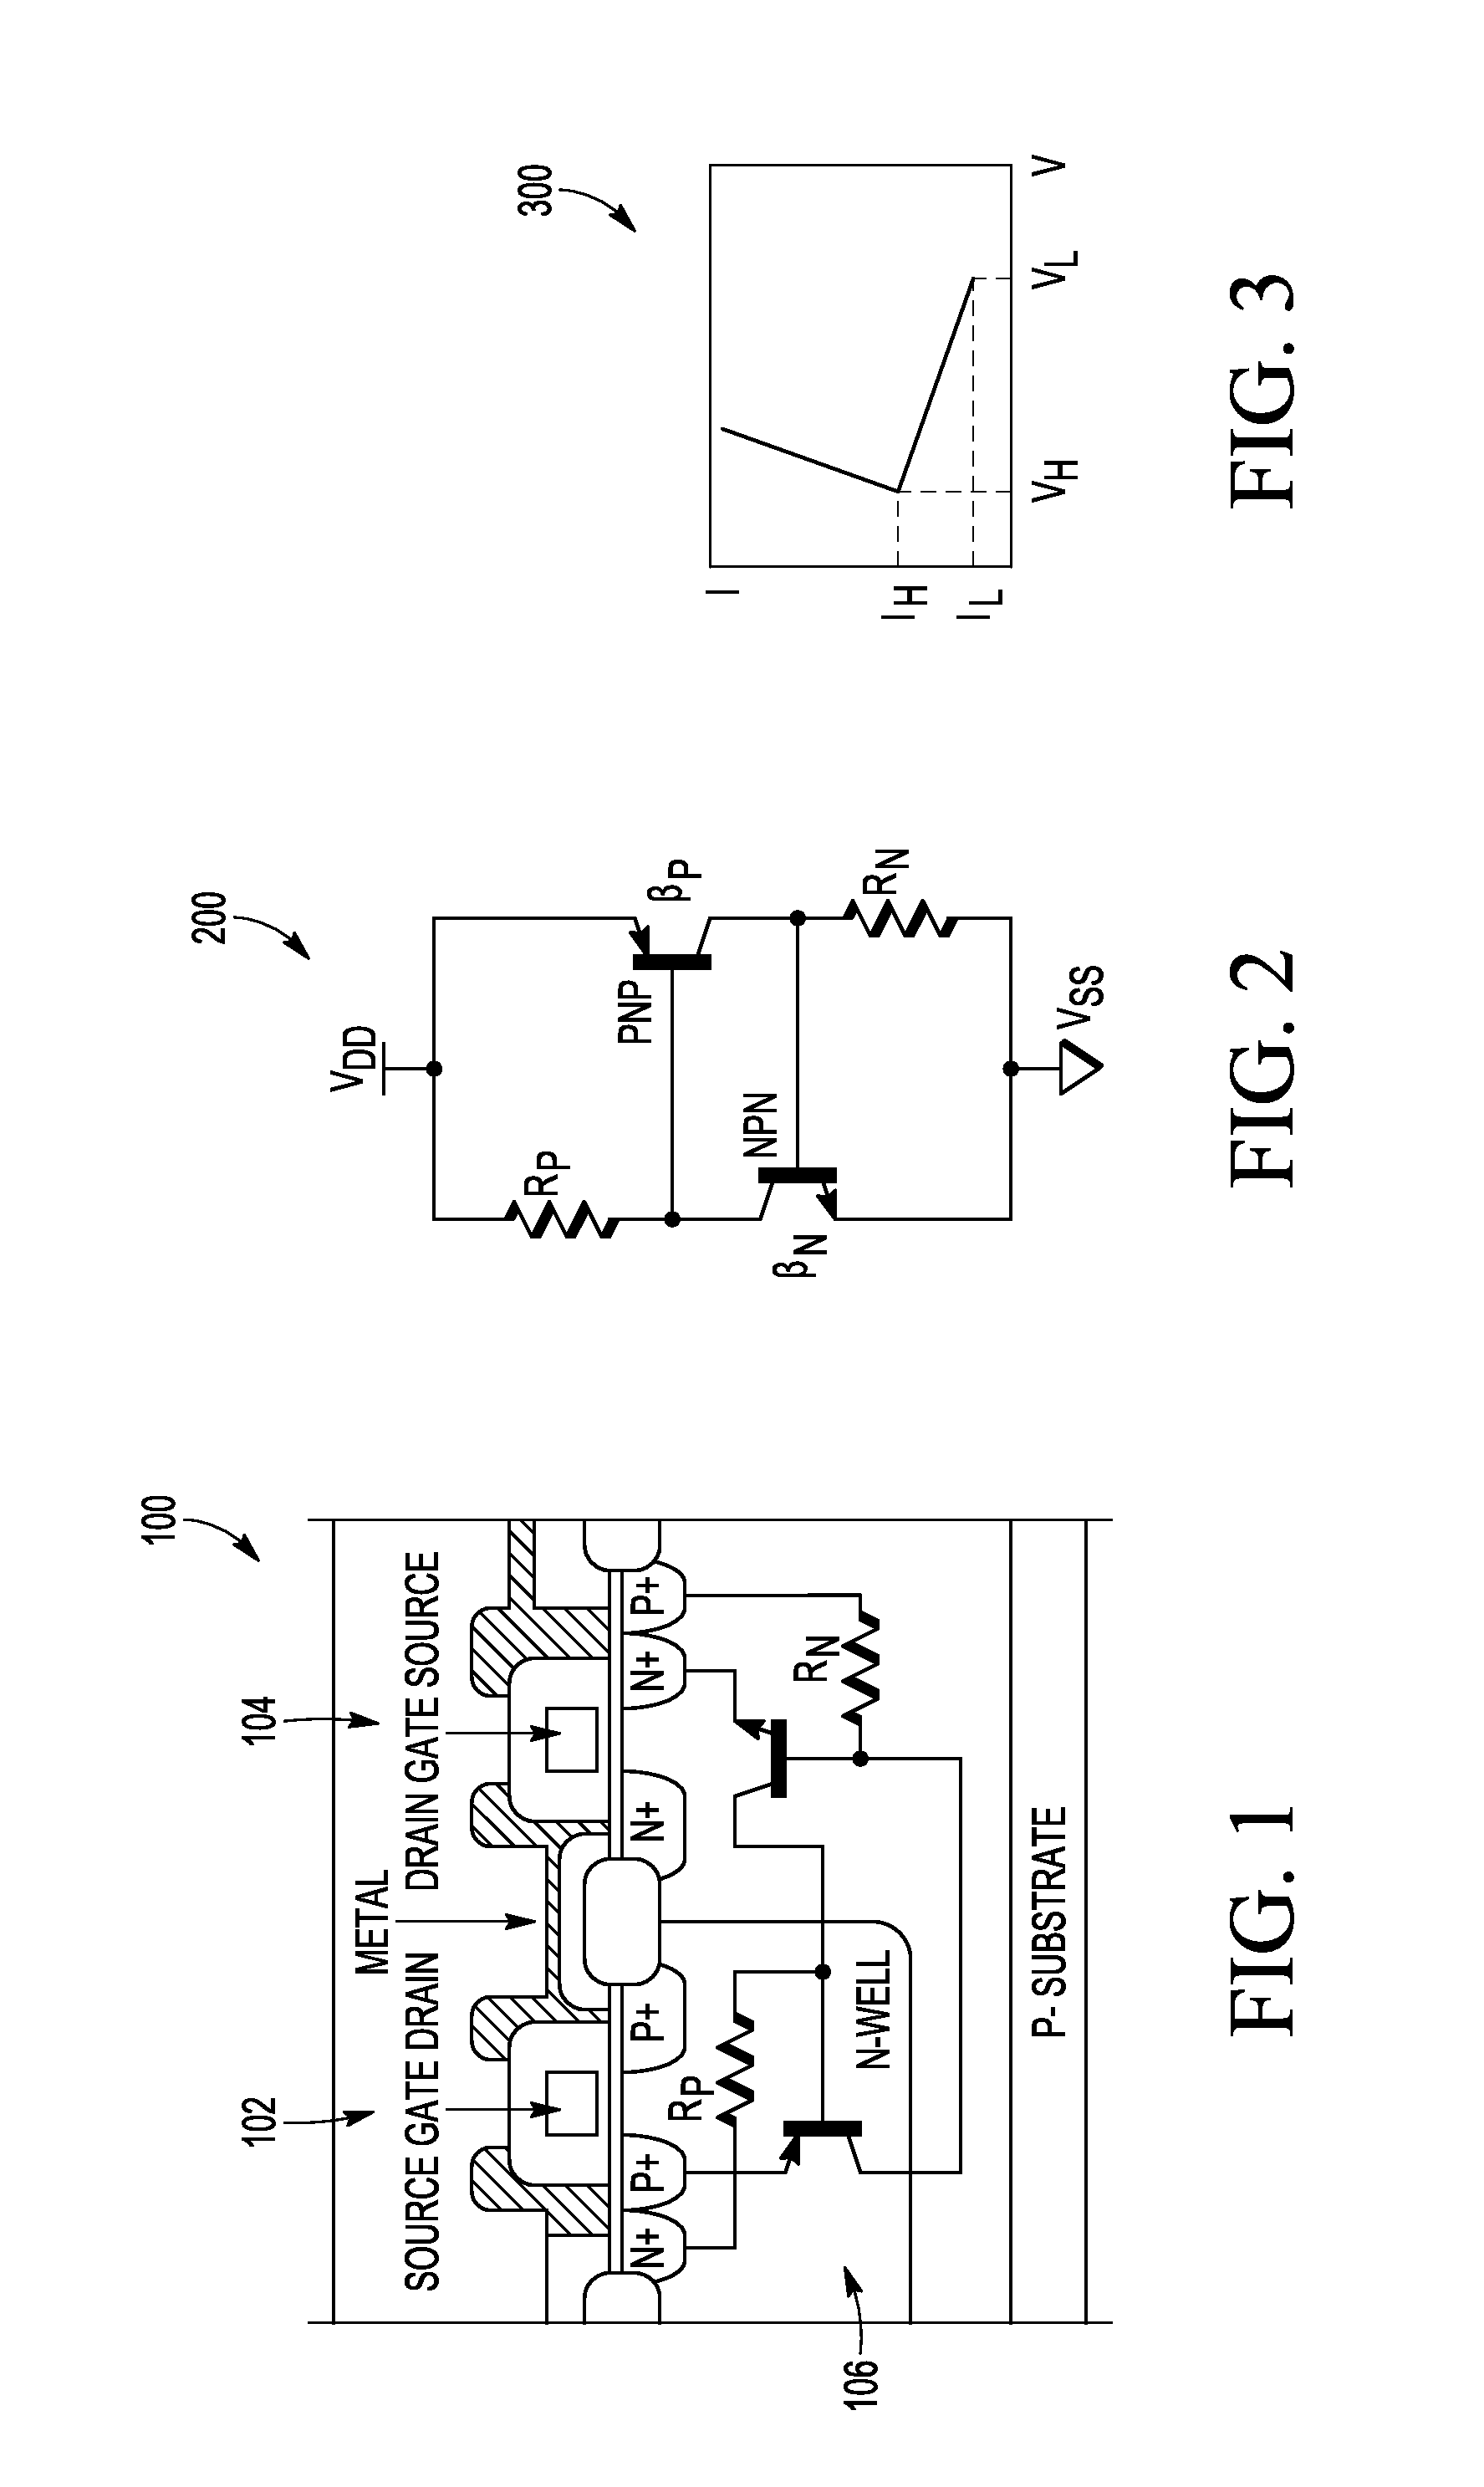 Single event latch-up prevention techniques for a semiconductor device